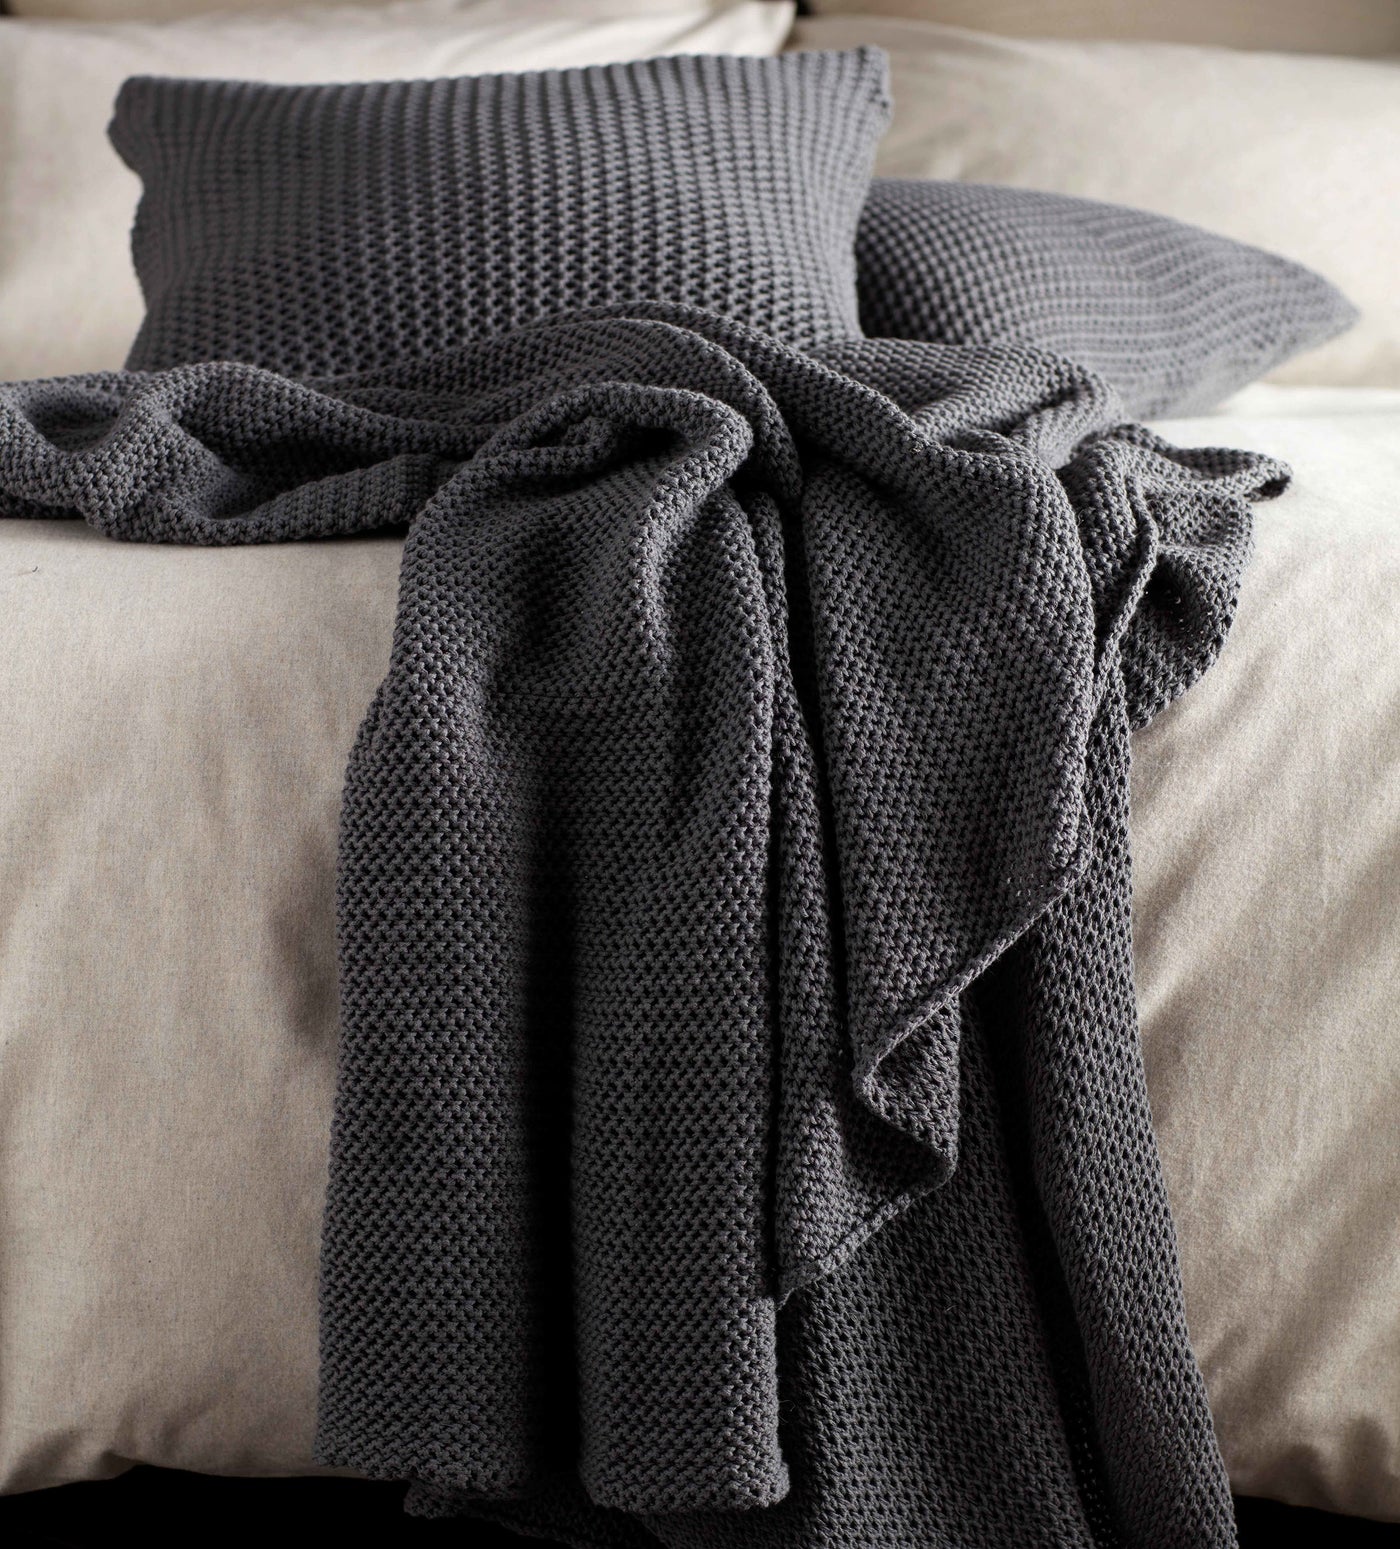 PEWTER COTTON KNITTED CUSHION AND THROW